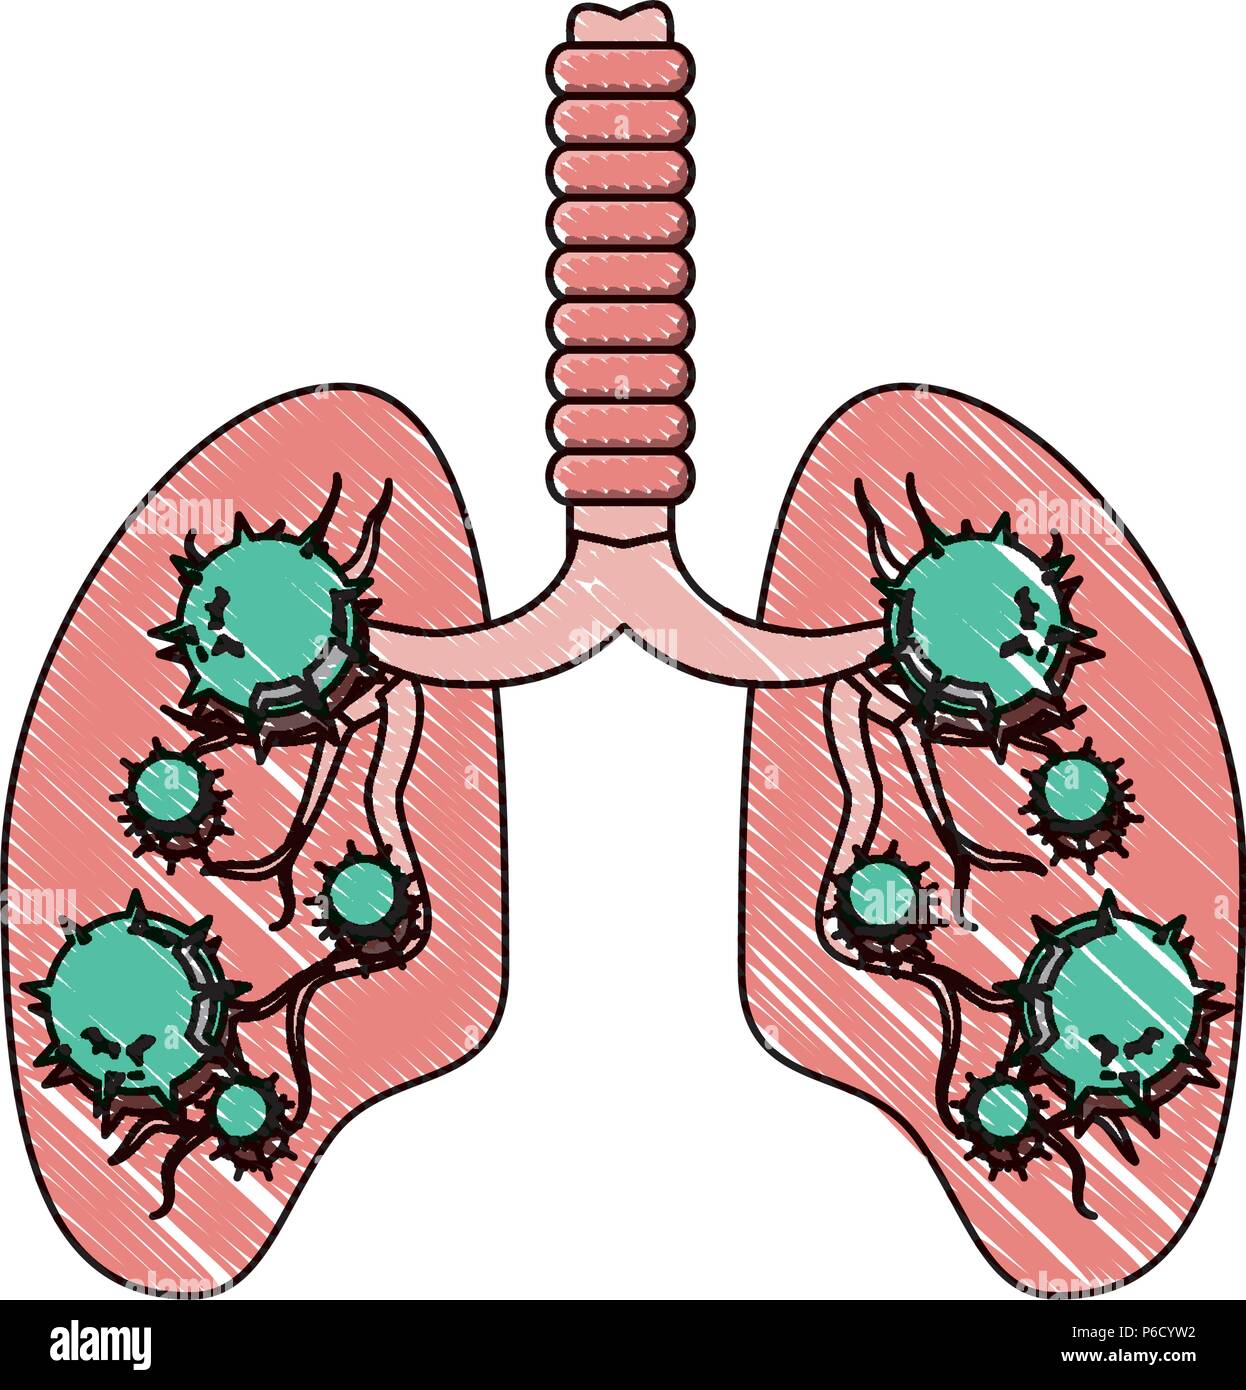 Respiratory Infection Stock Photos & Respiratory Infection Stock Images - Alamy1246 x 1390